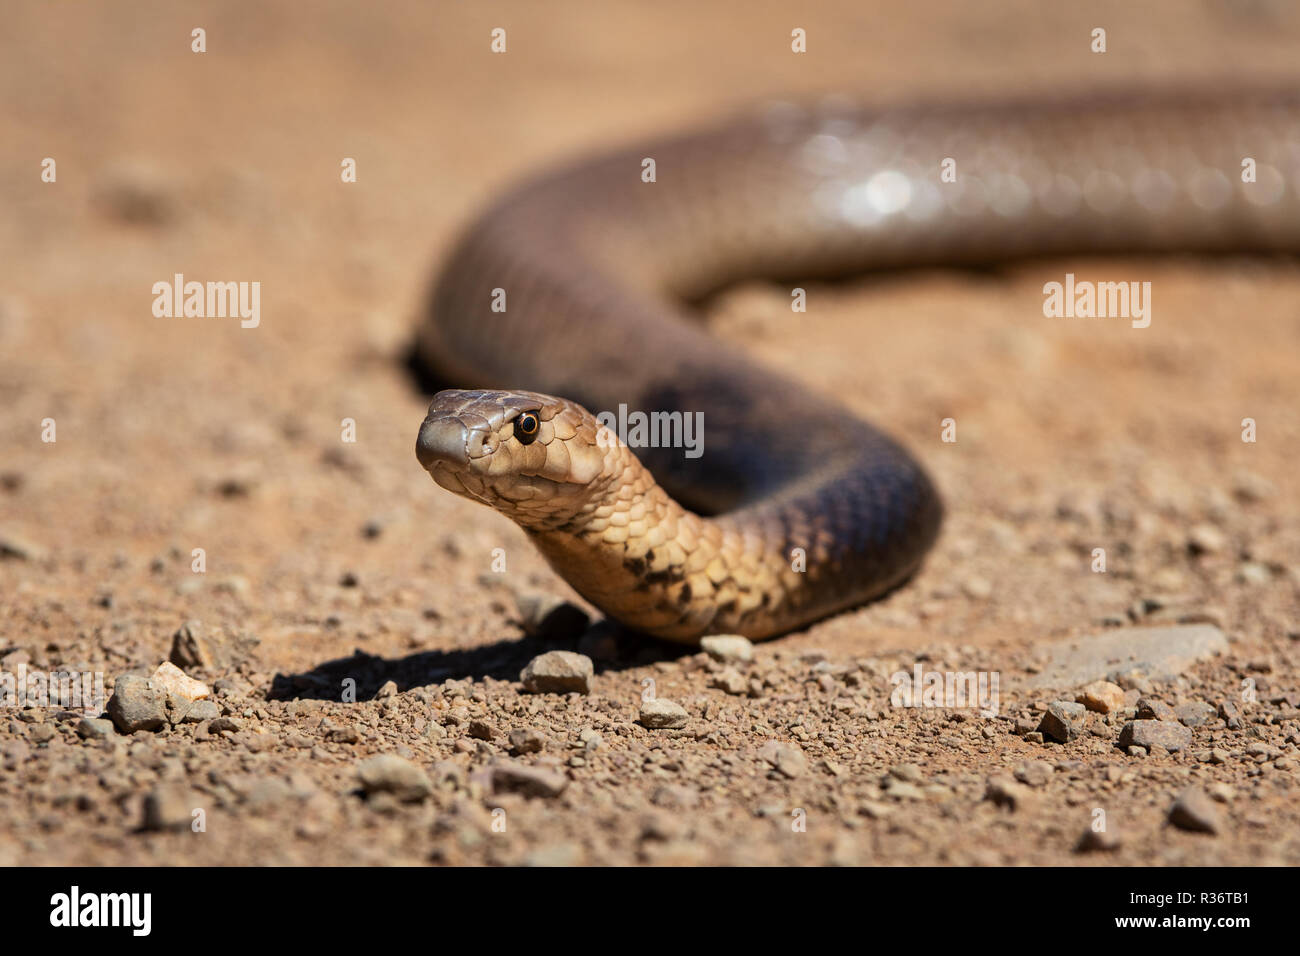 A venomous Strap-snouted Brown Snake raising its head. Stock Photo